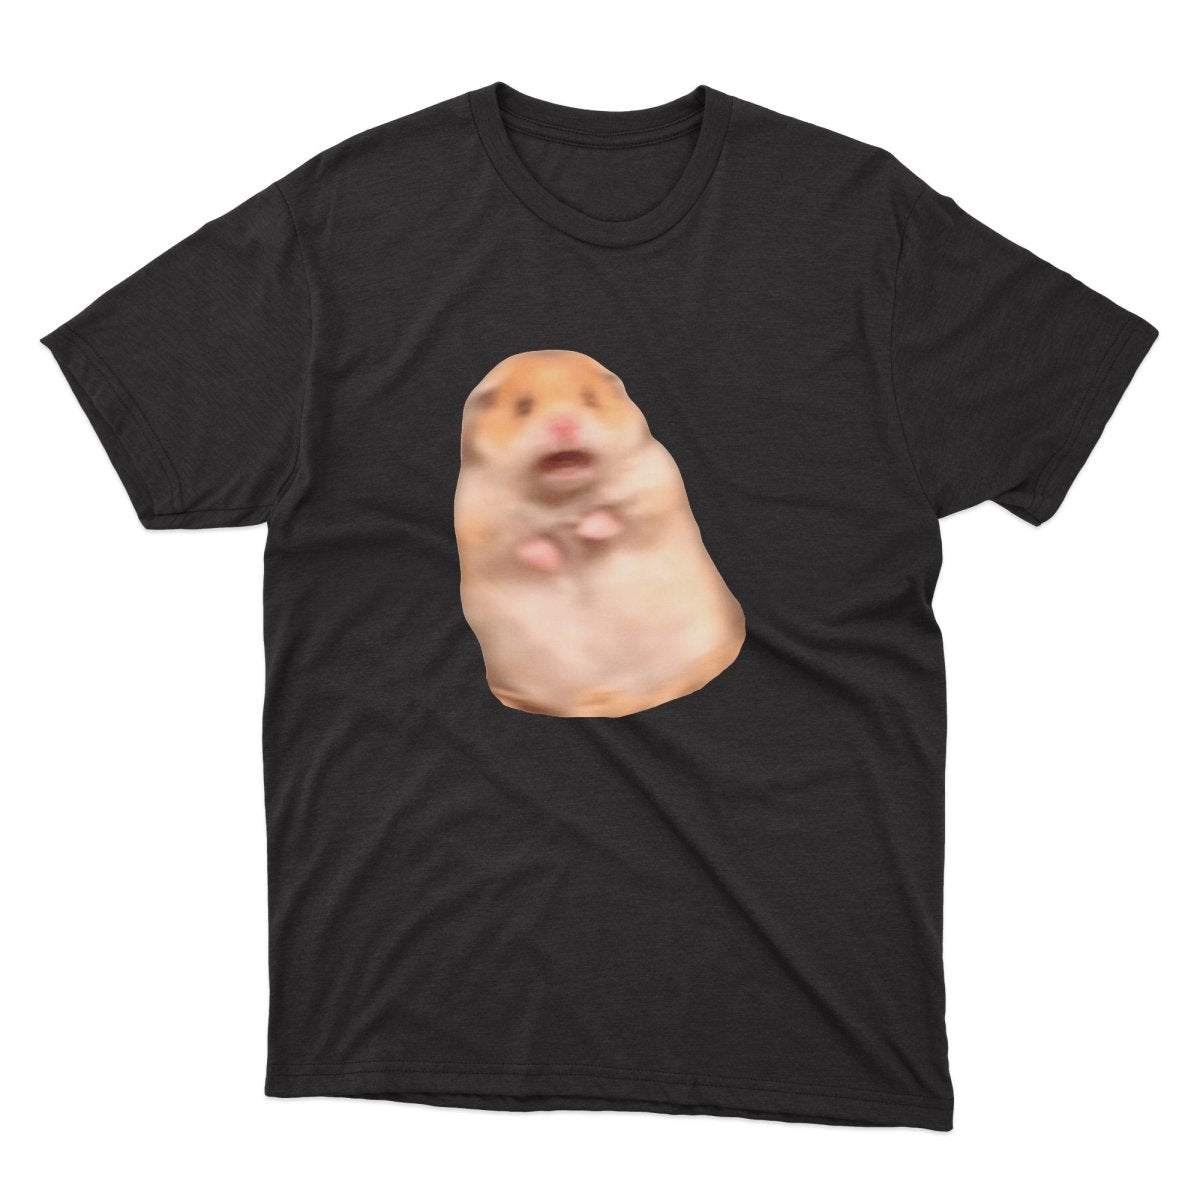 Screaming Hamster Meme Shirt - stickerbullScreaming Hamster Meme ShirtShirtsPrintifystickerbull28558657009392892826BlackSa black t - shirt with a hamster on it